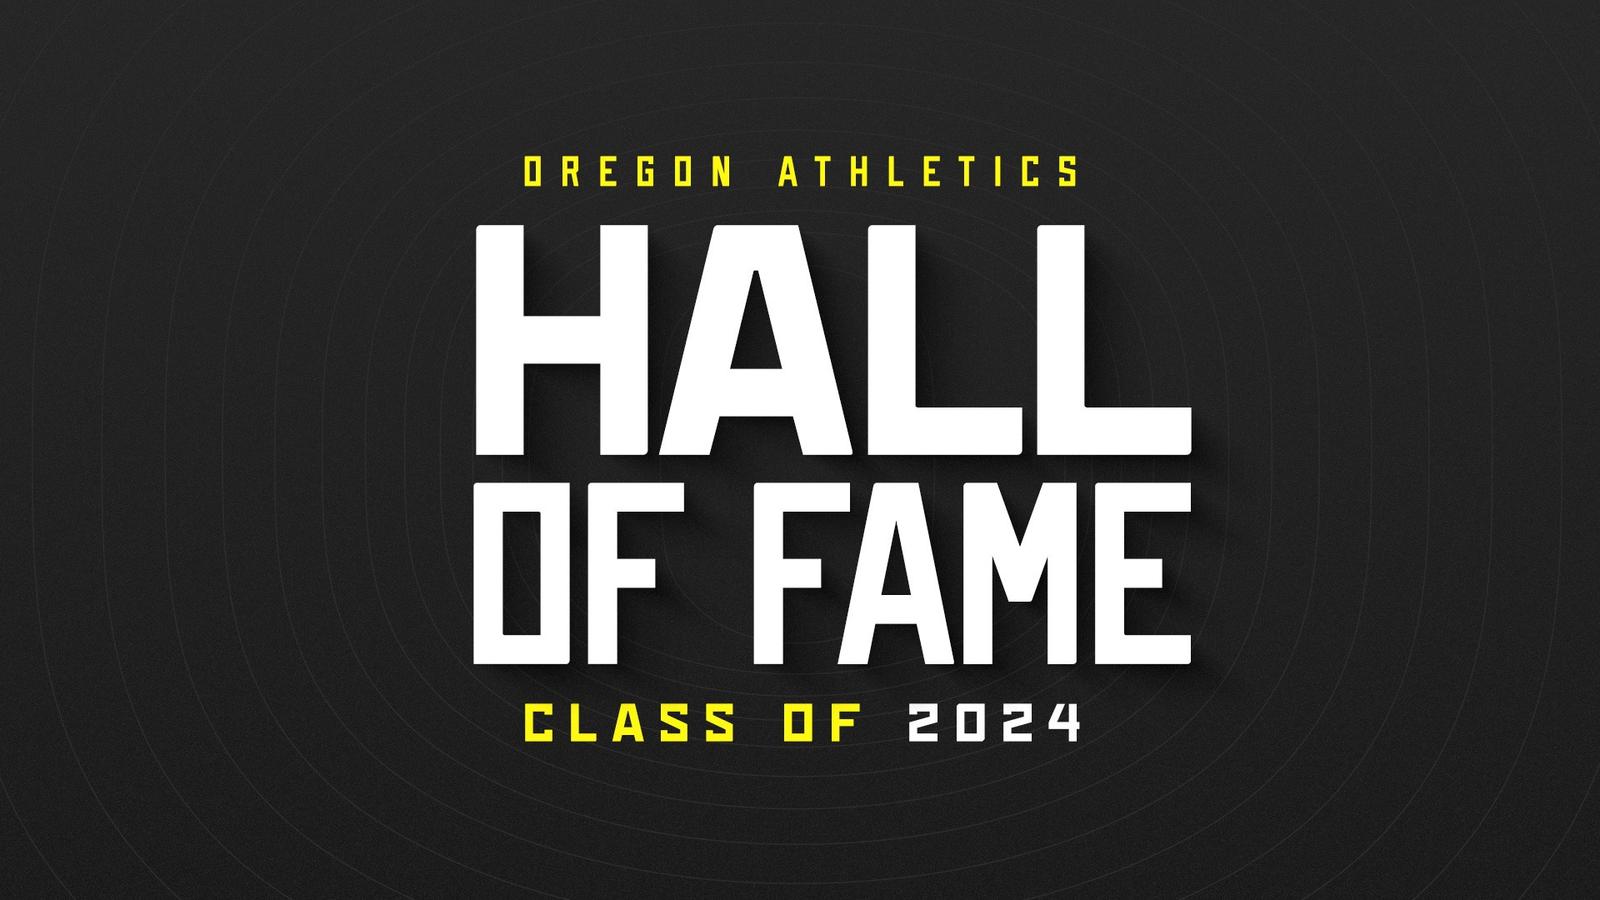 2024 Oregon Hall of Fame Class Announced